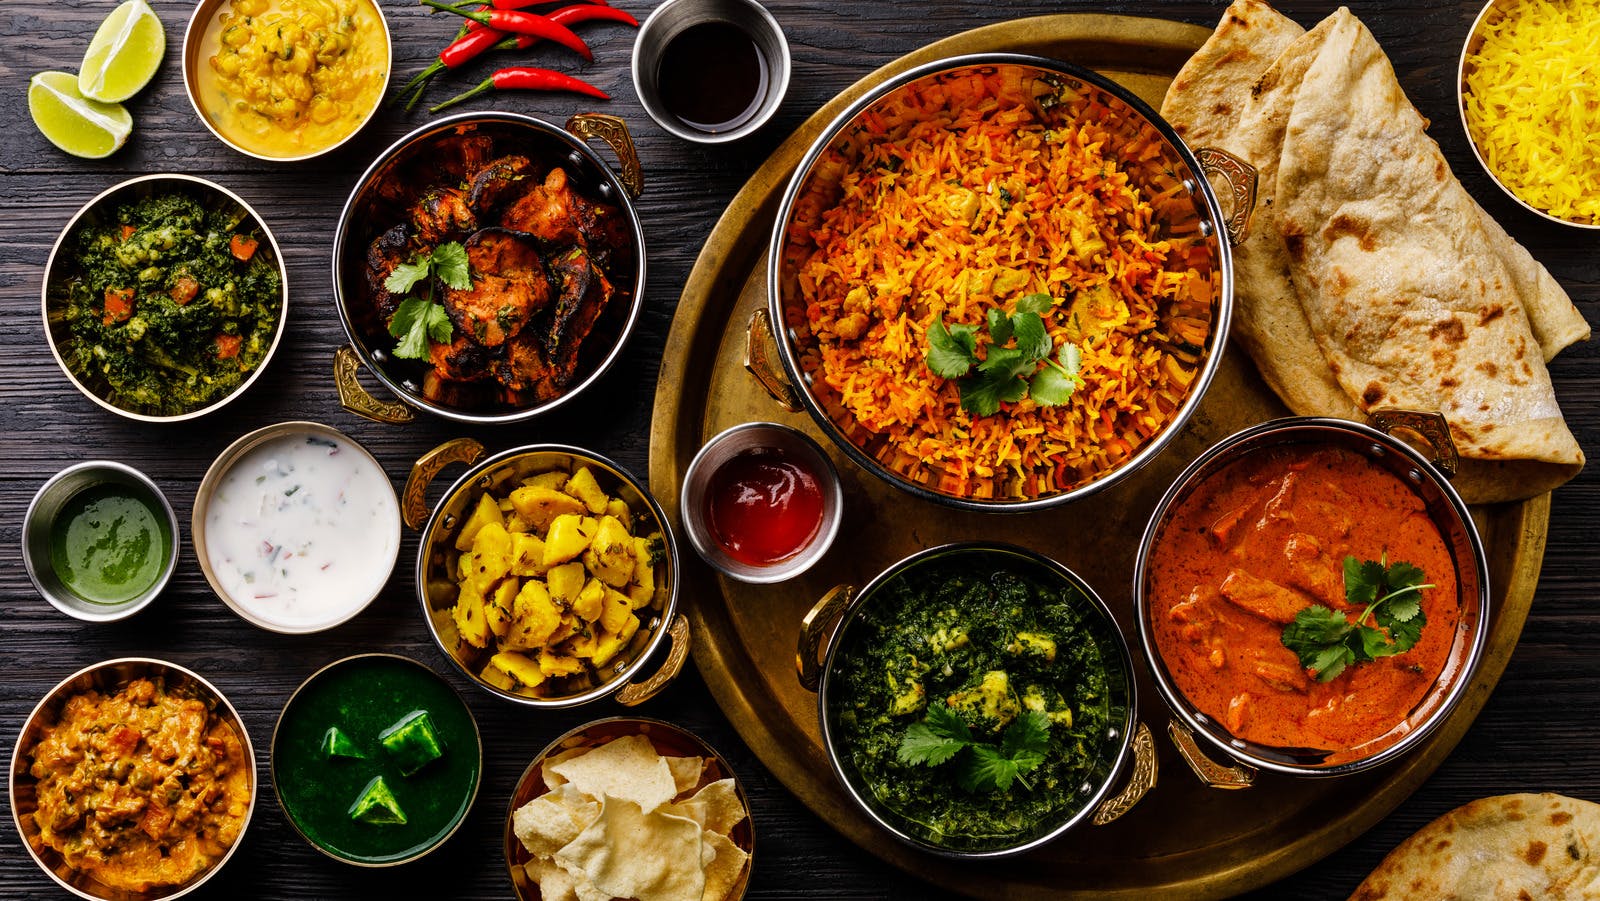 These Indian restaurants are sure to transport you to the streets of India. So if you're feeling nostalgic or just hungry, be sure to give them a try!